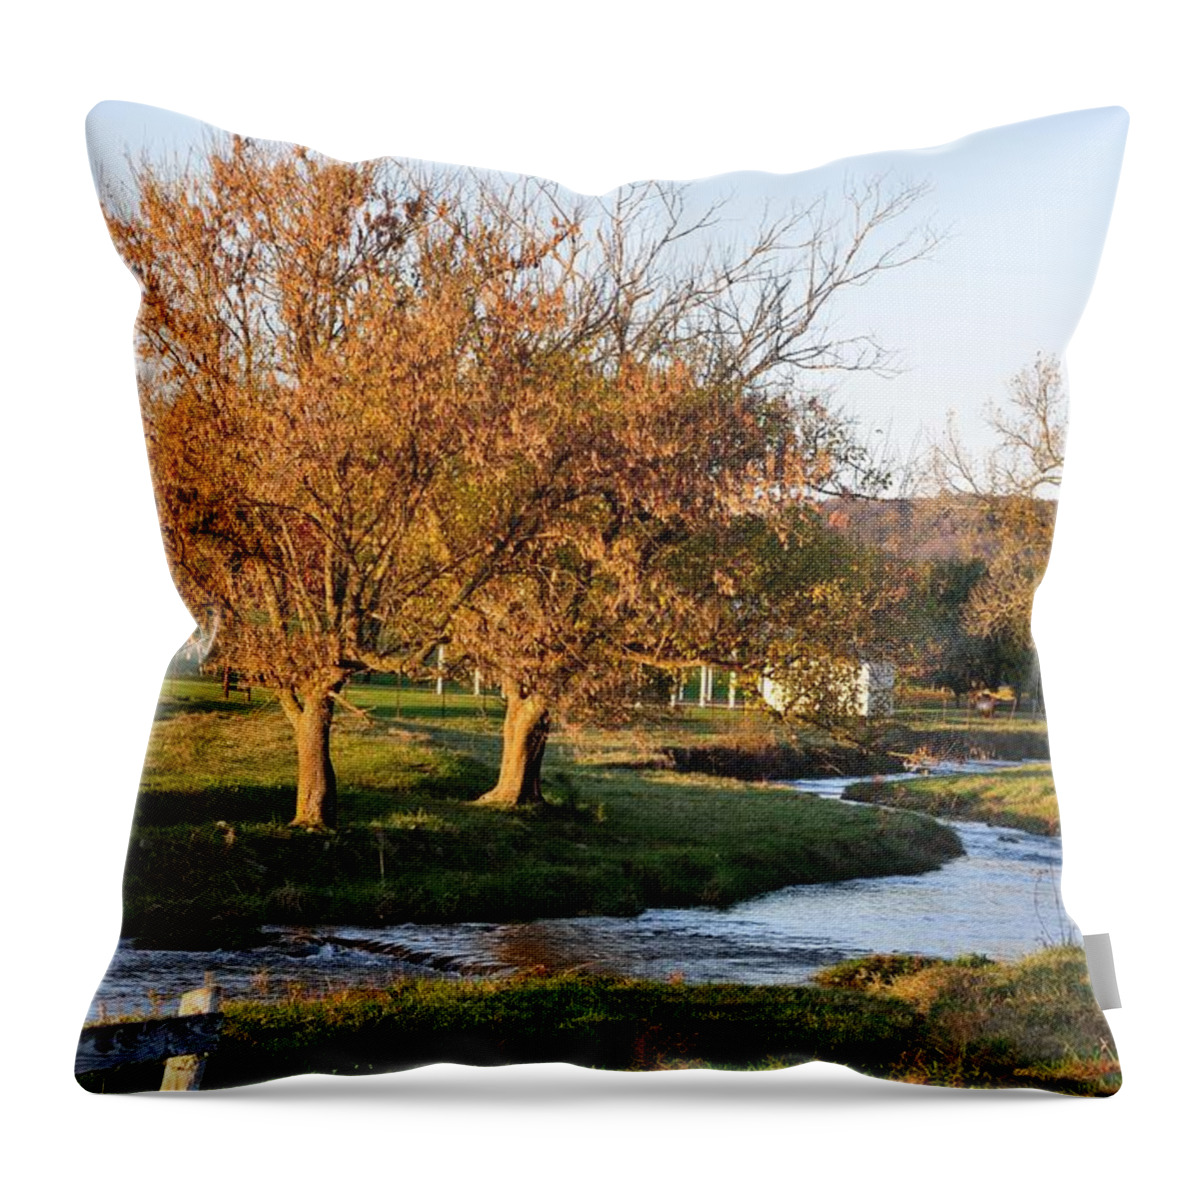 Landscapes Throw Pillow featuring the photograph Bending Creek by Jan Amiss Photography